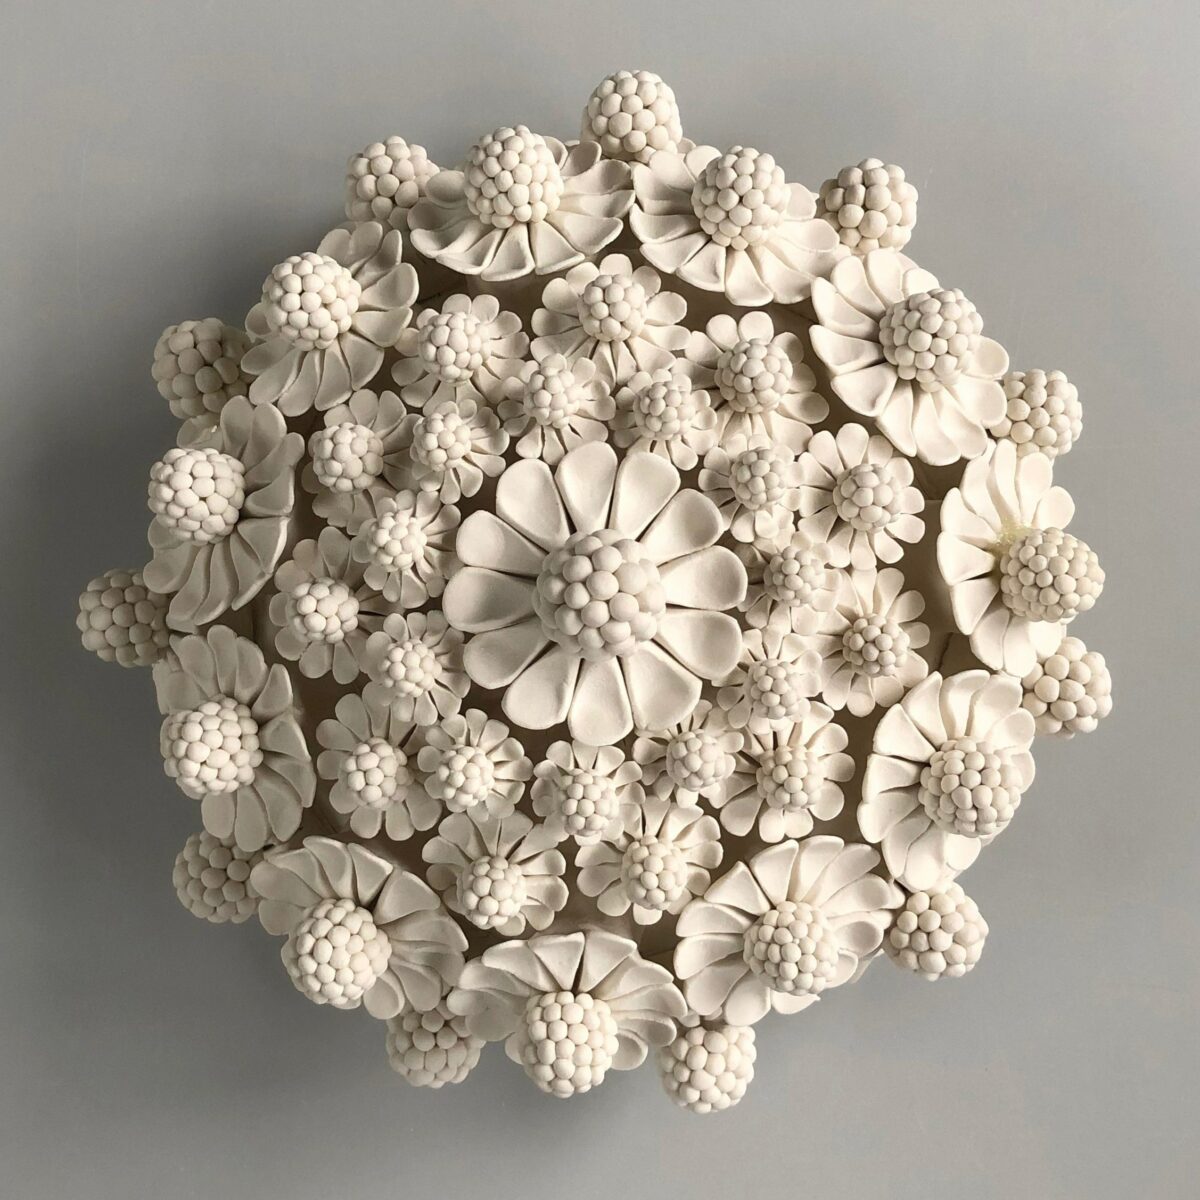 Gorgeous Ceramic Art Pieces Ornate With Intricate Porcelain Flowers By Vanessa Hogge (4)